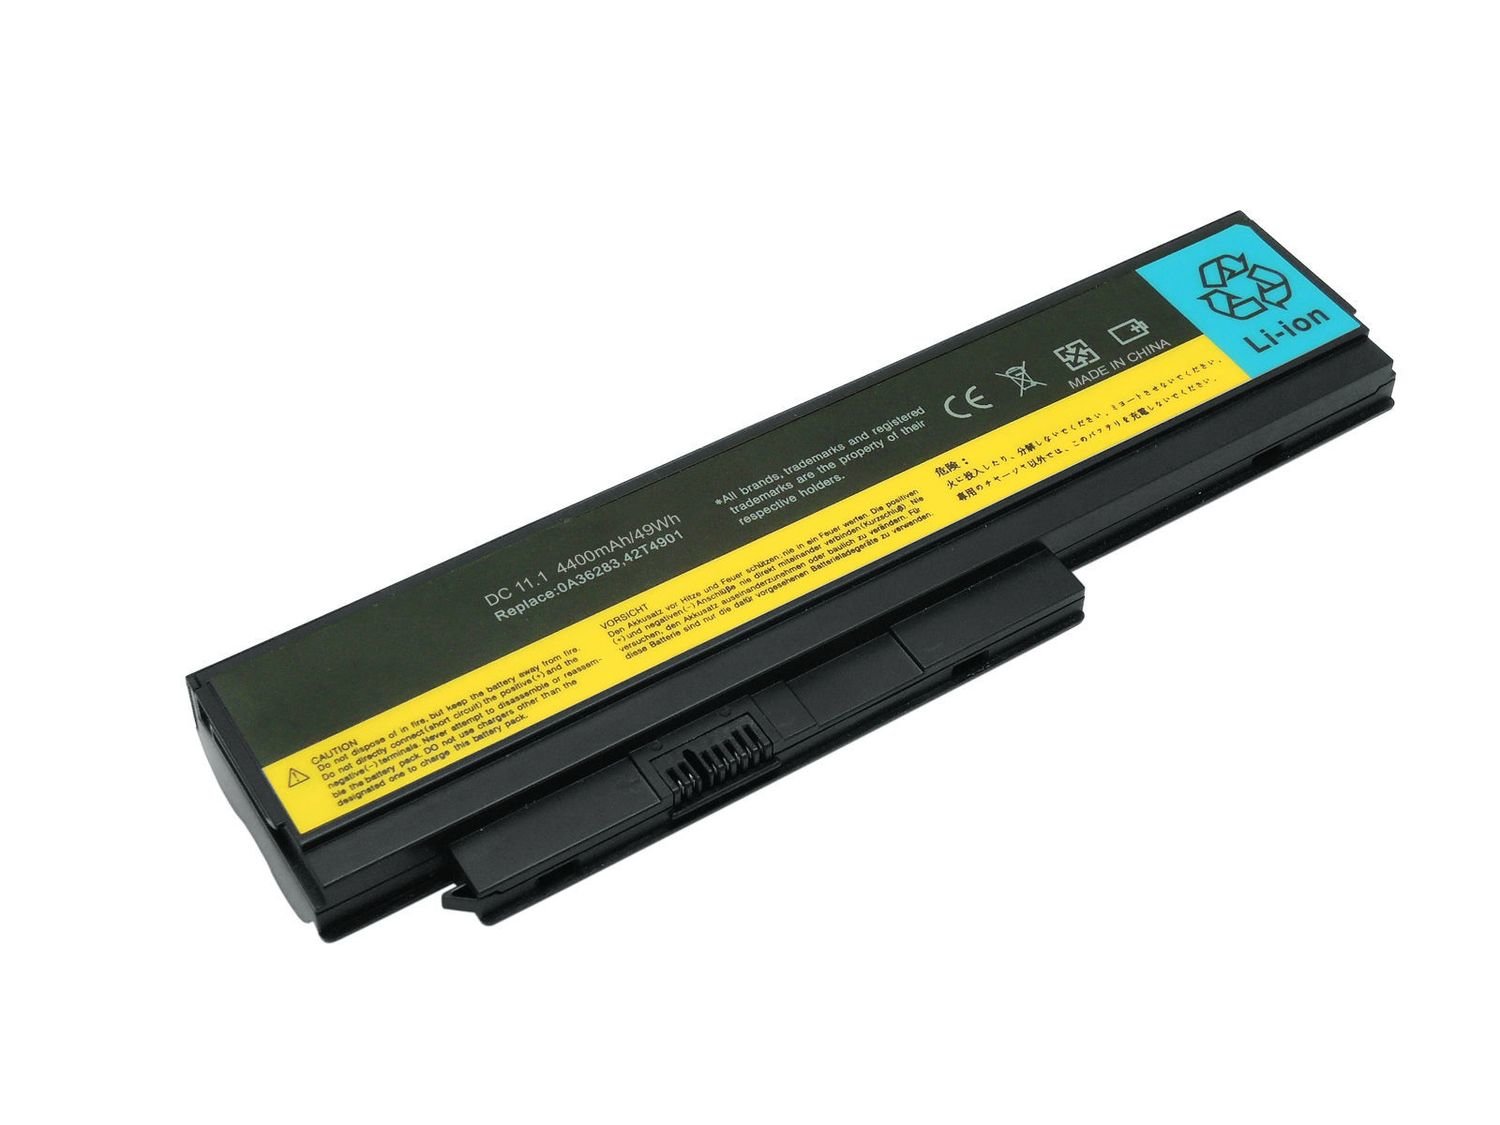 compatible for Lenovo 42T4861, 42T4862, 42T4863, 42T4865, 0A36281, 0A36282, 0A36283 battery